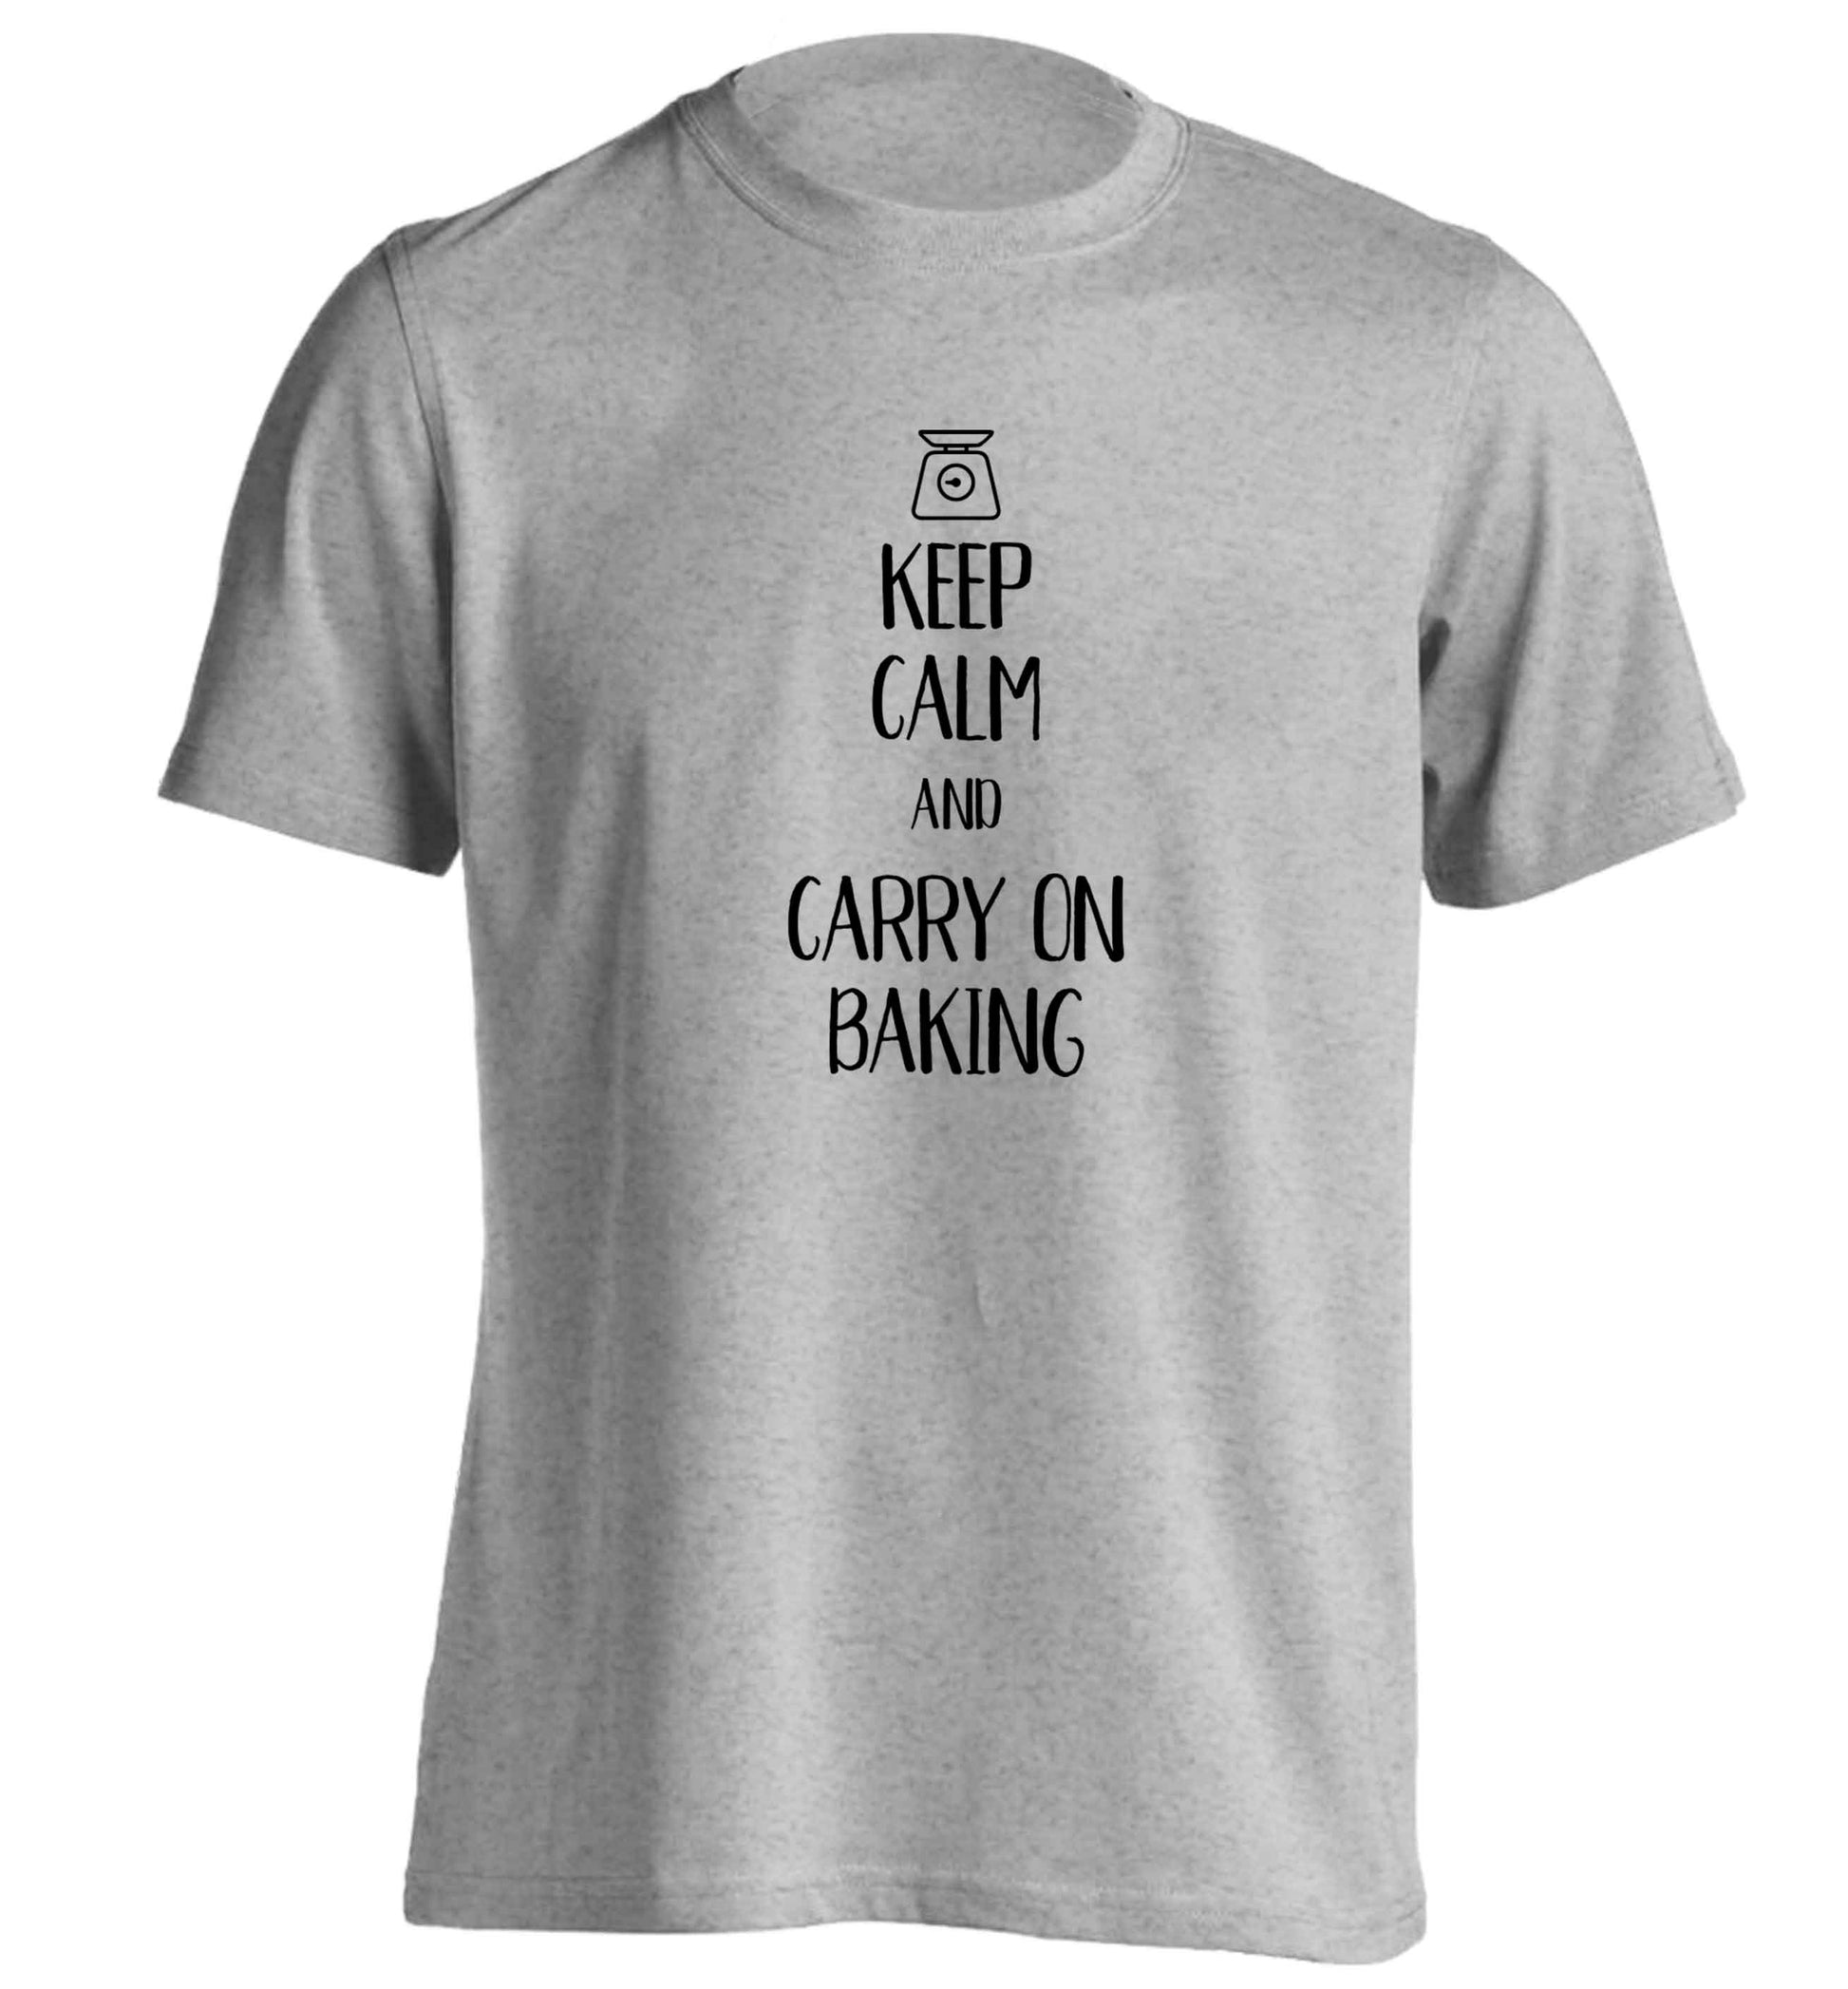 Keep calm and carry on baking adults unisex grey Tshirt 2XL